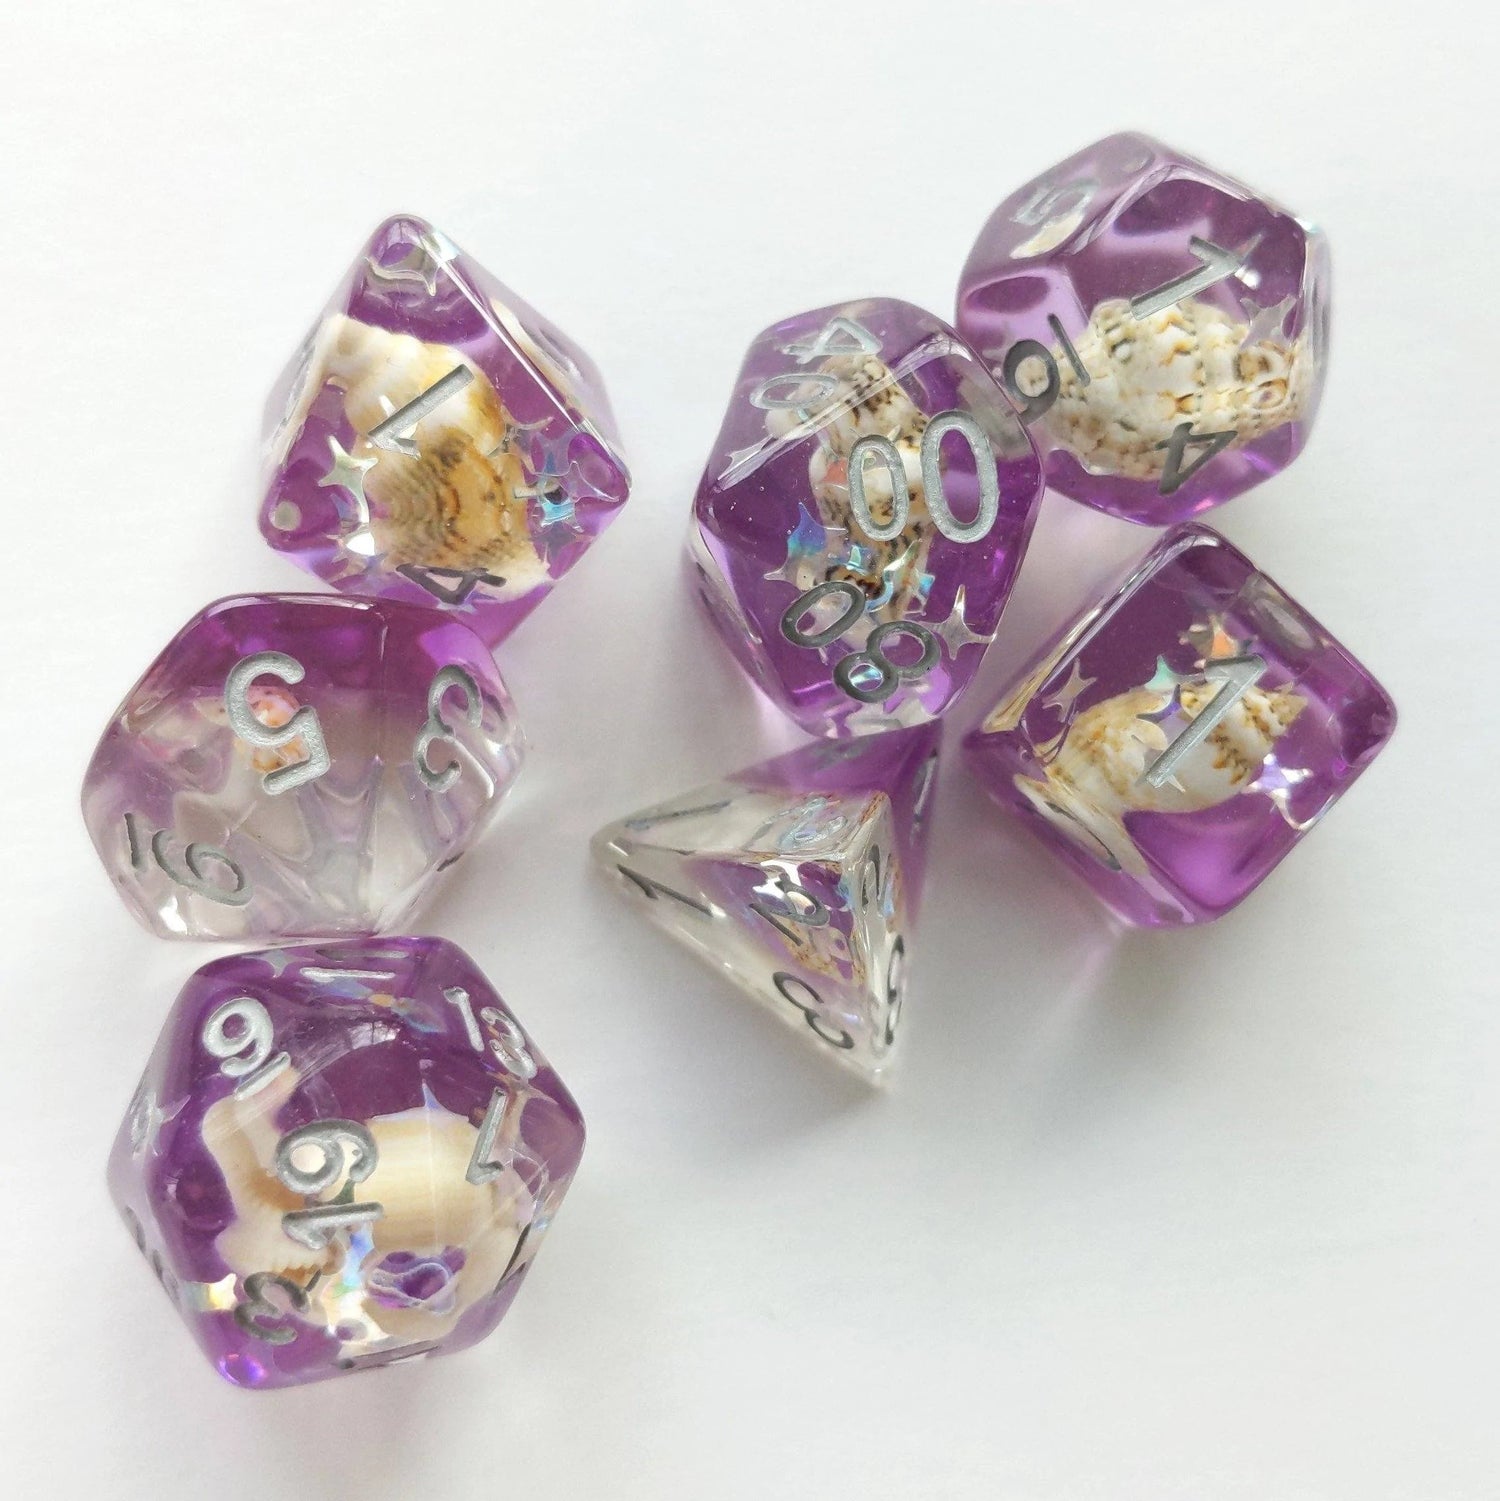 Purple Conch Dice - 7 Dice Set (Real Seashells from the Ocean) - The Fourth Place